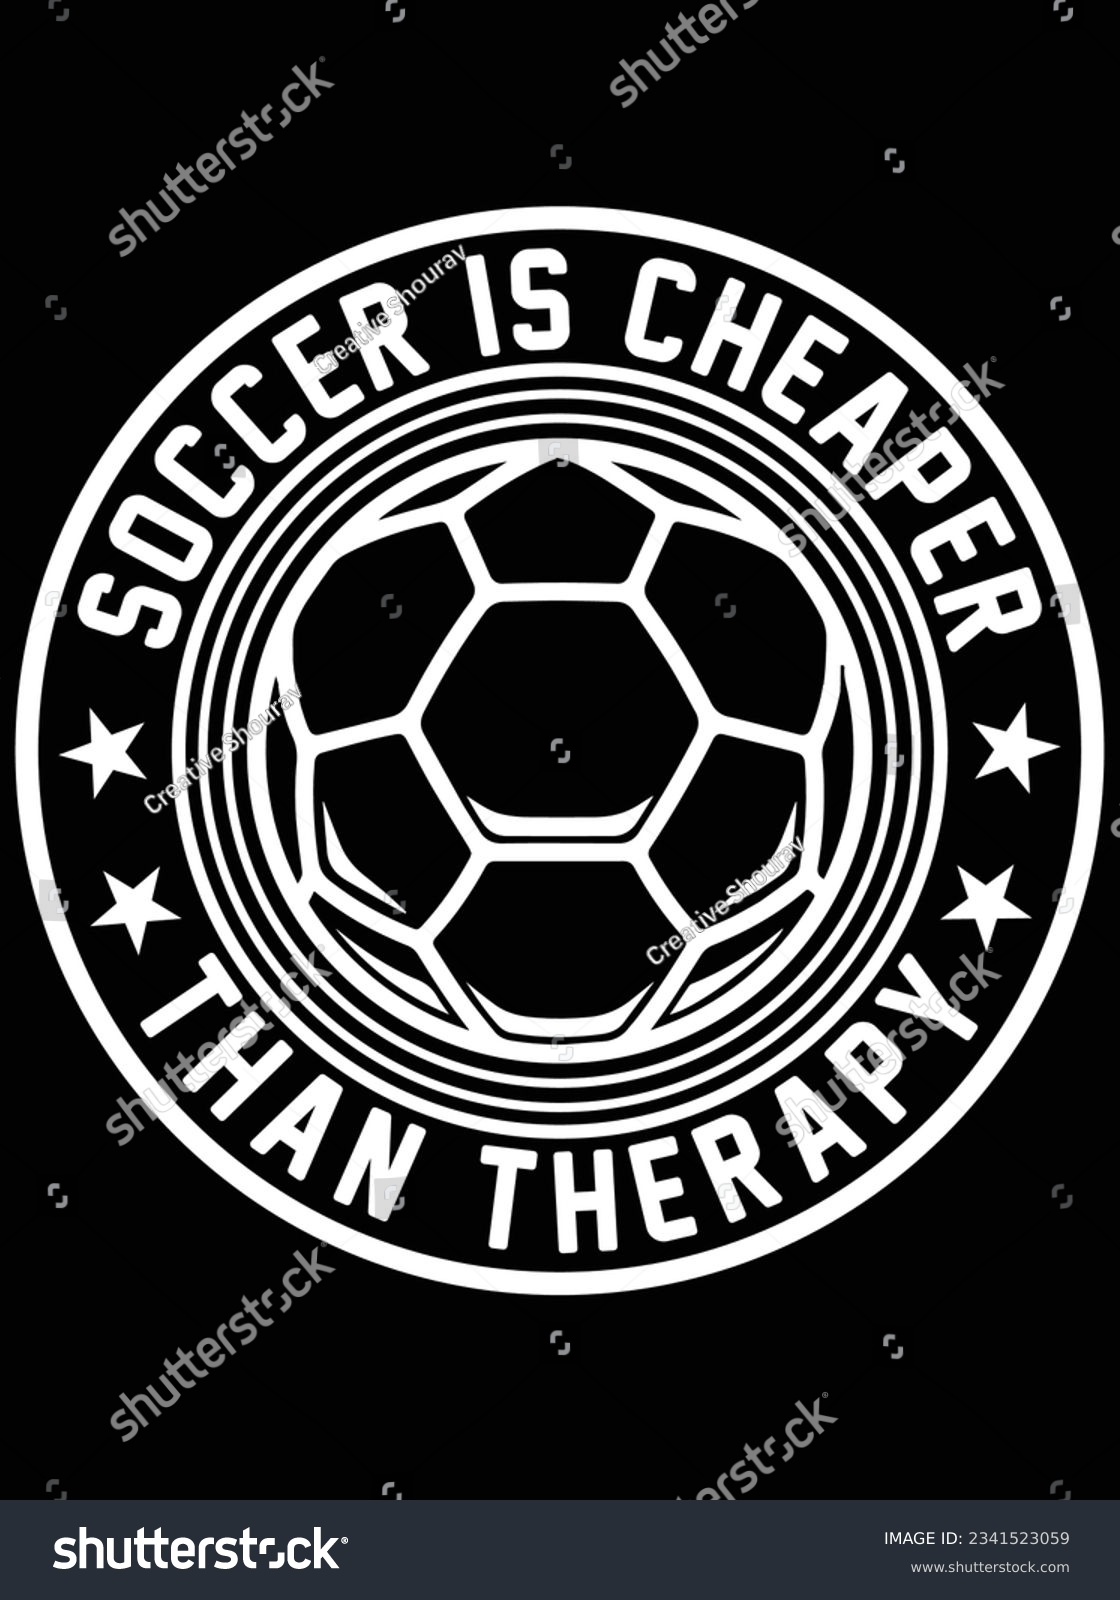 SVG of Soccer is cheaper than therapy vector art design, eps file. design file for t-shirt. SVG, EPS cuttable design file svg